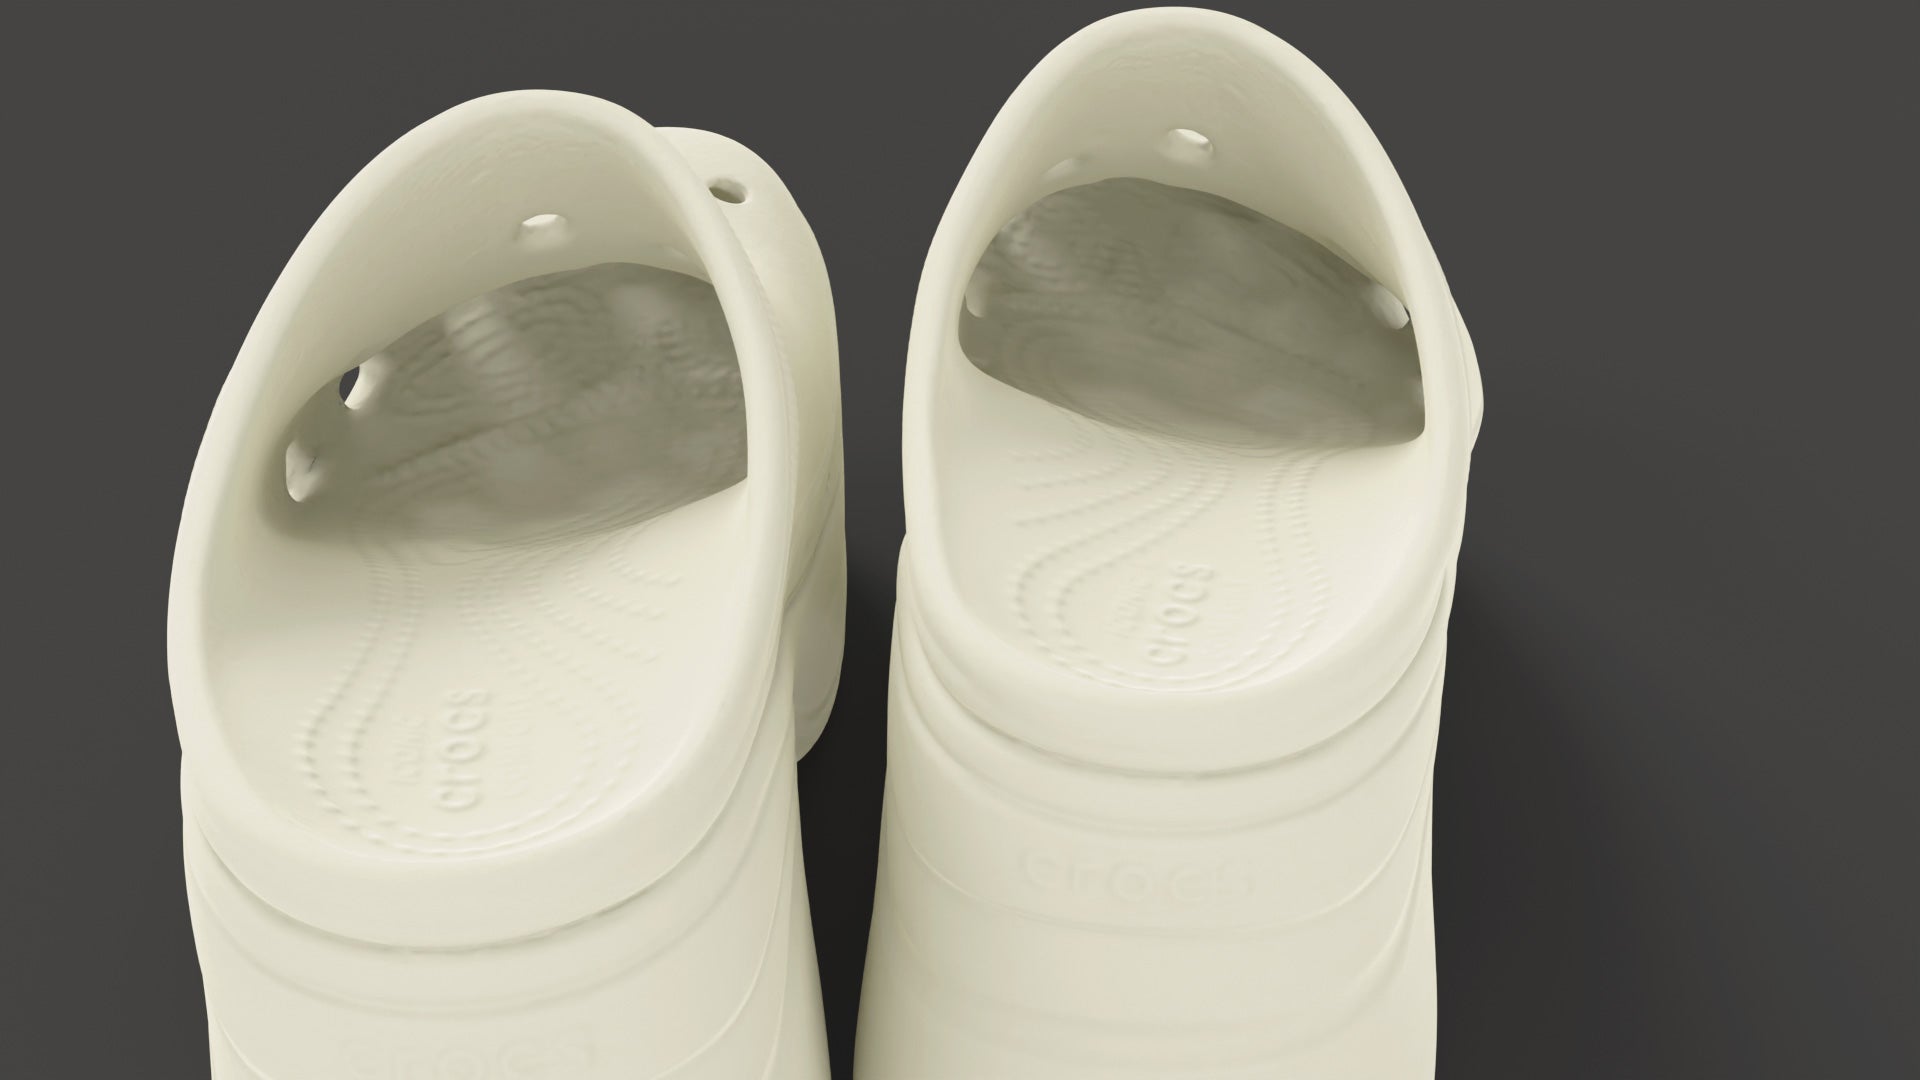 A 3d model of a pair of siren clogs crocs shoes seen from behind, were the details and bumps of the sole can be appreciated